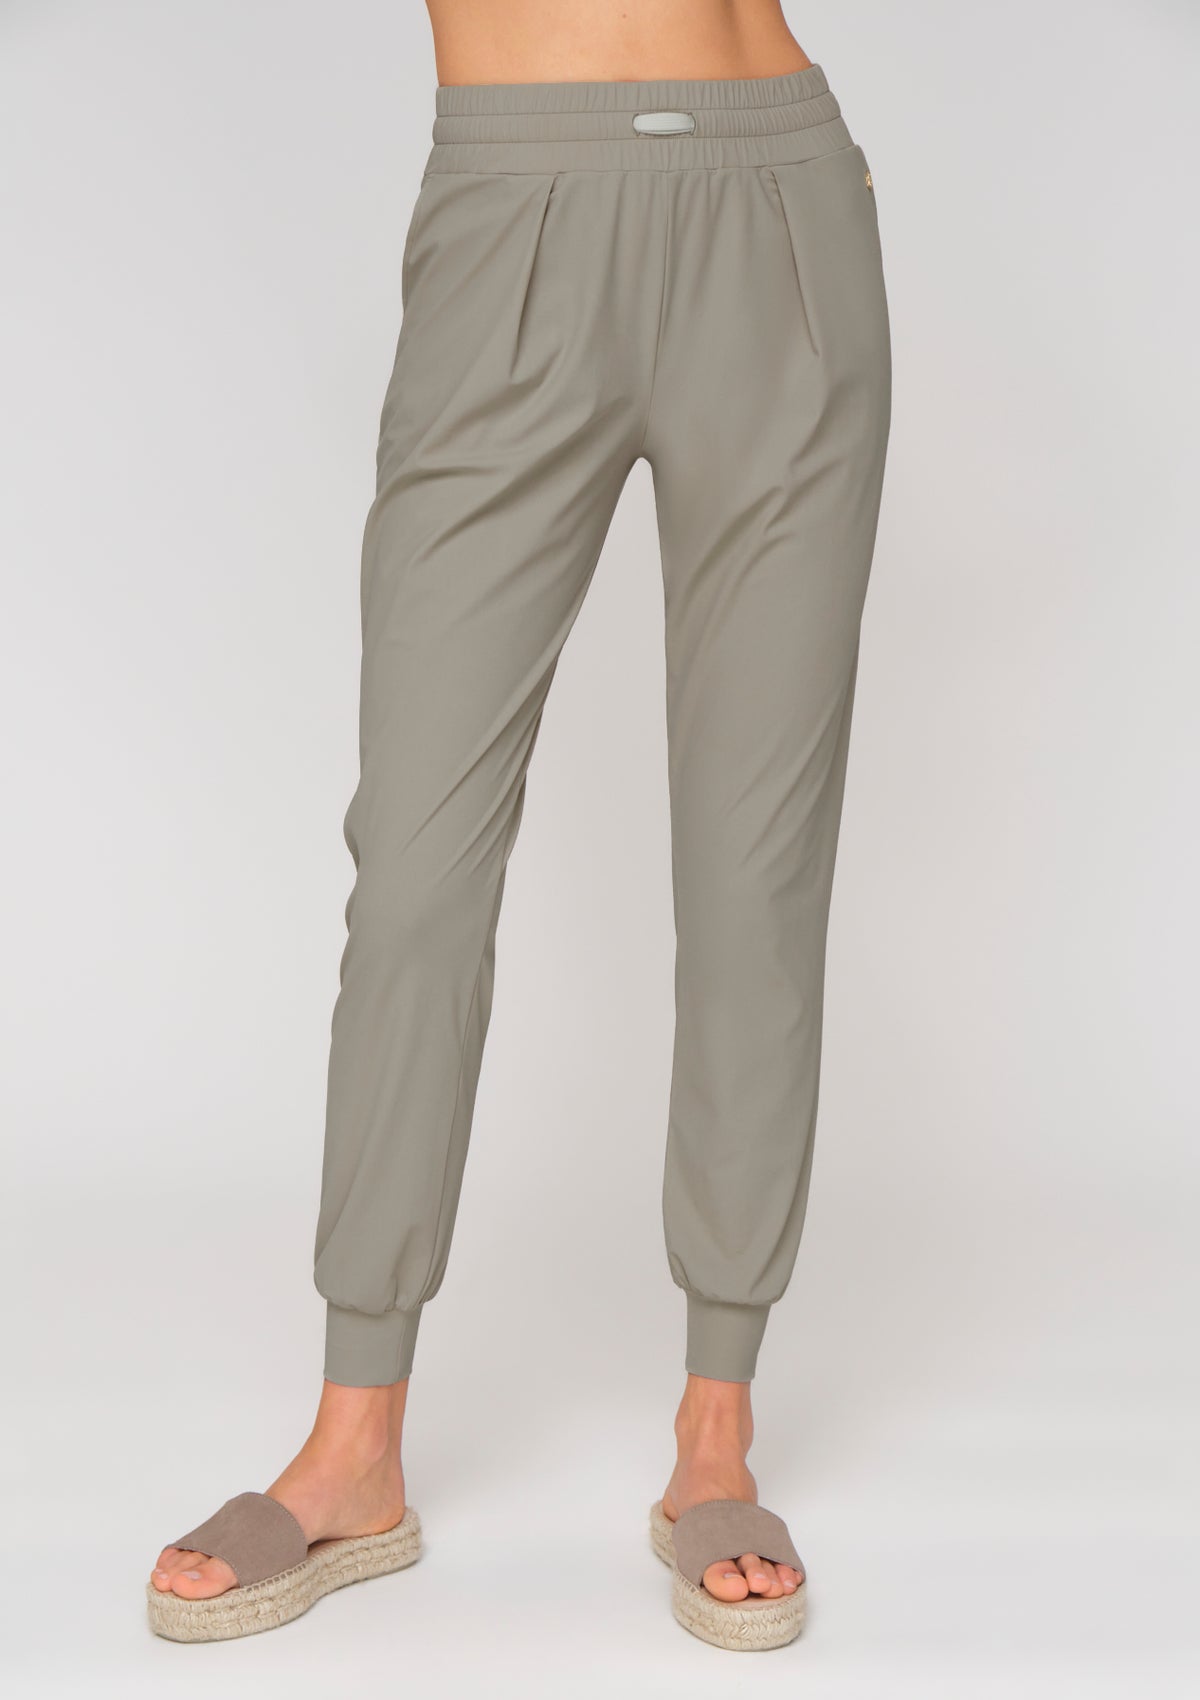 LUXE LÉGER Track Pants mira